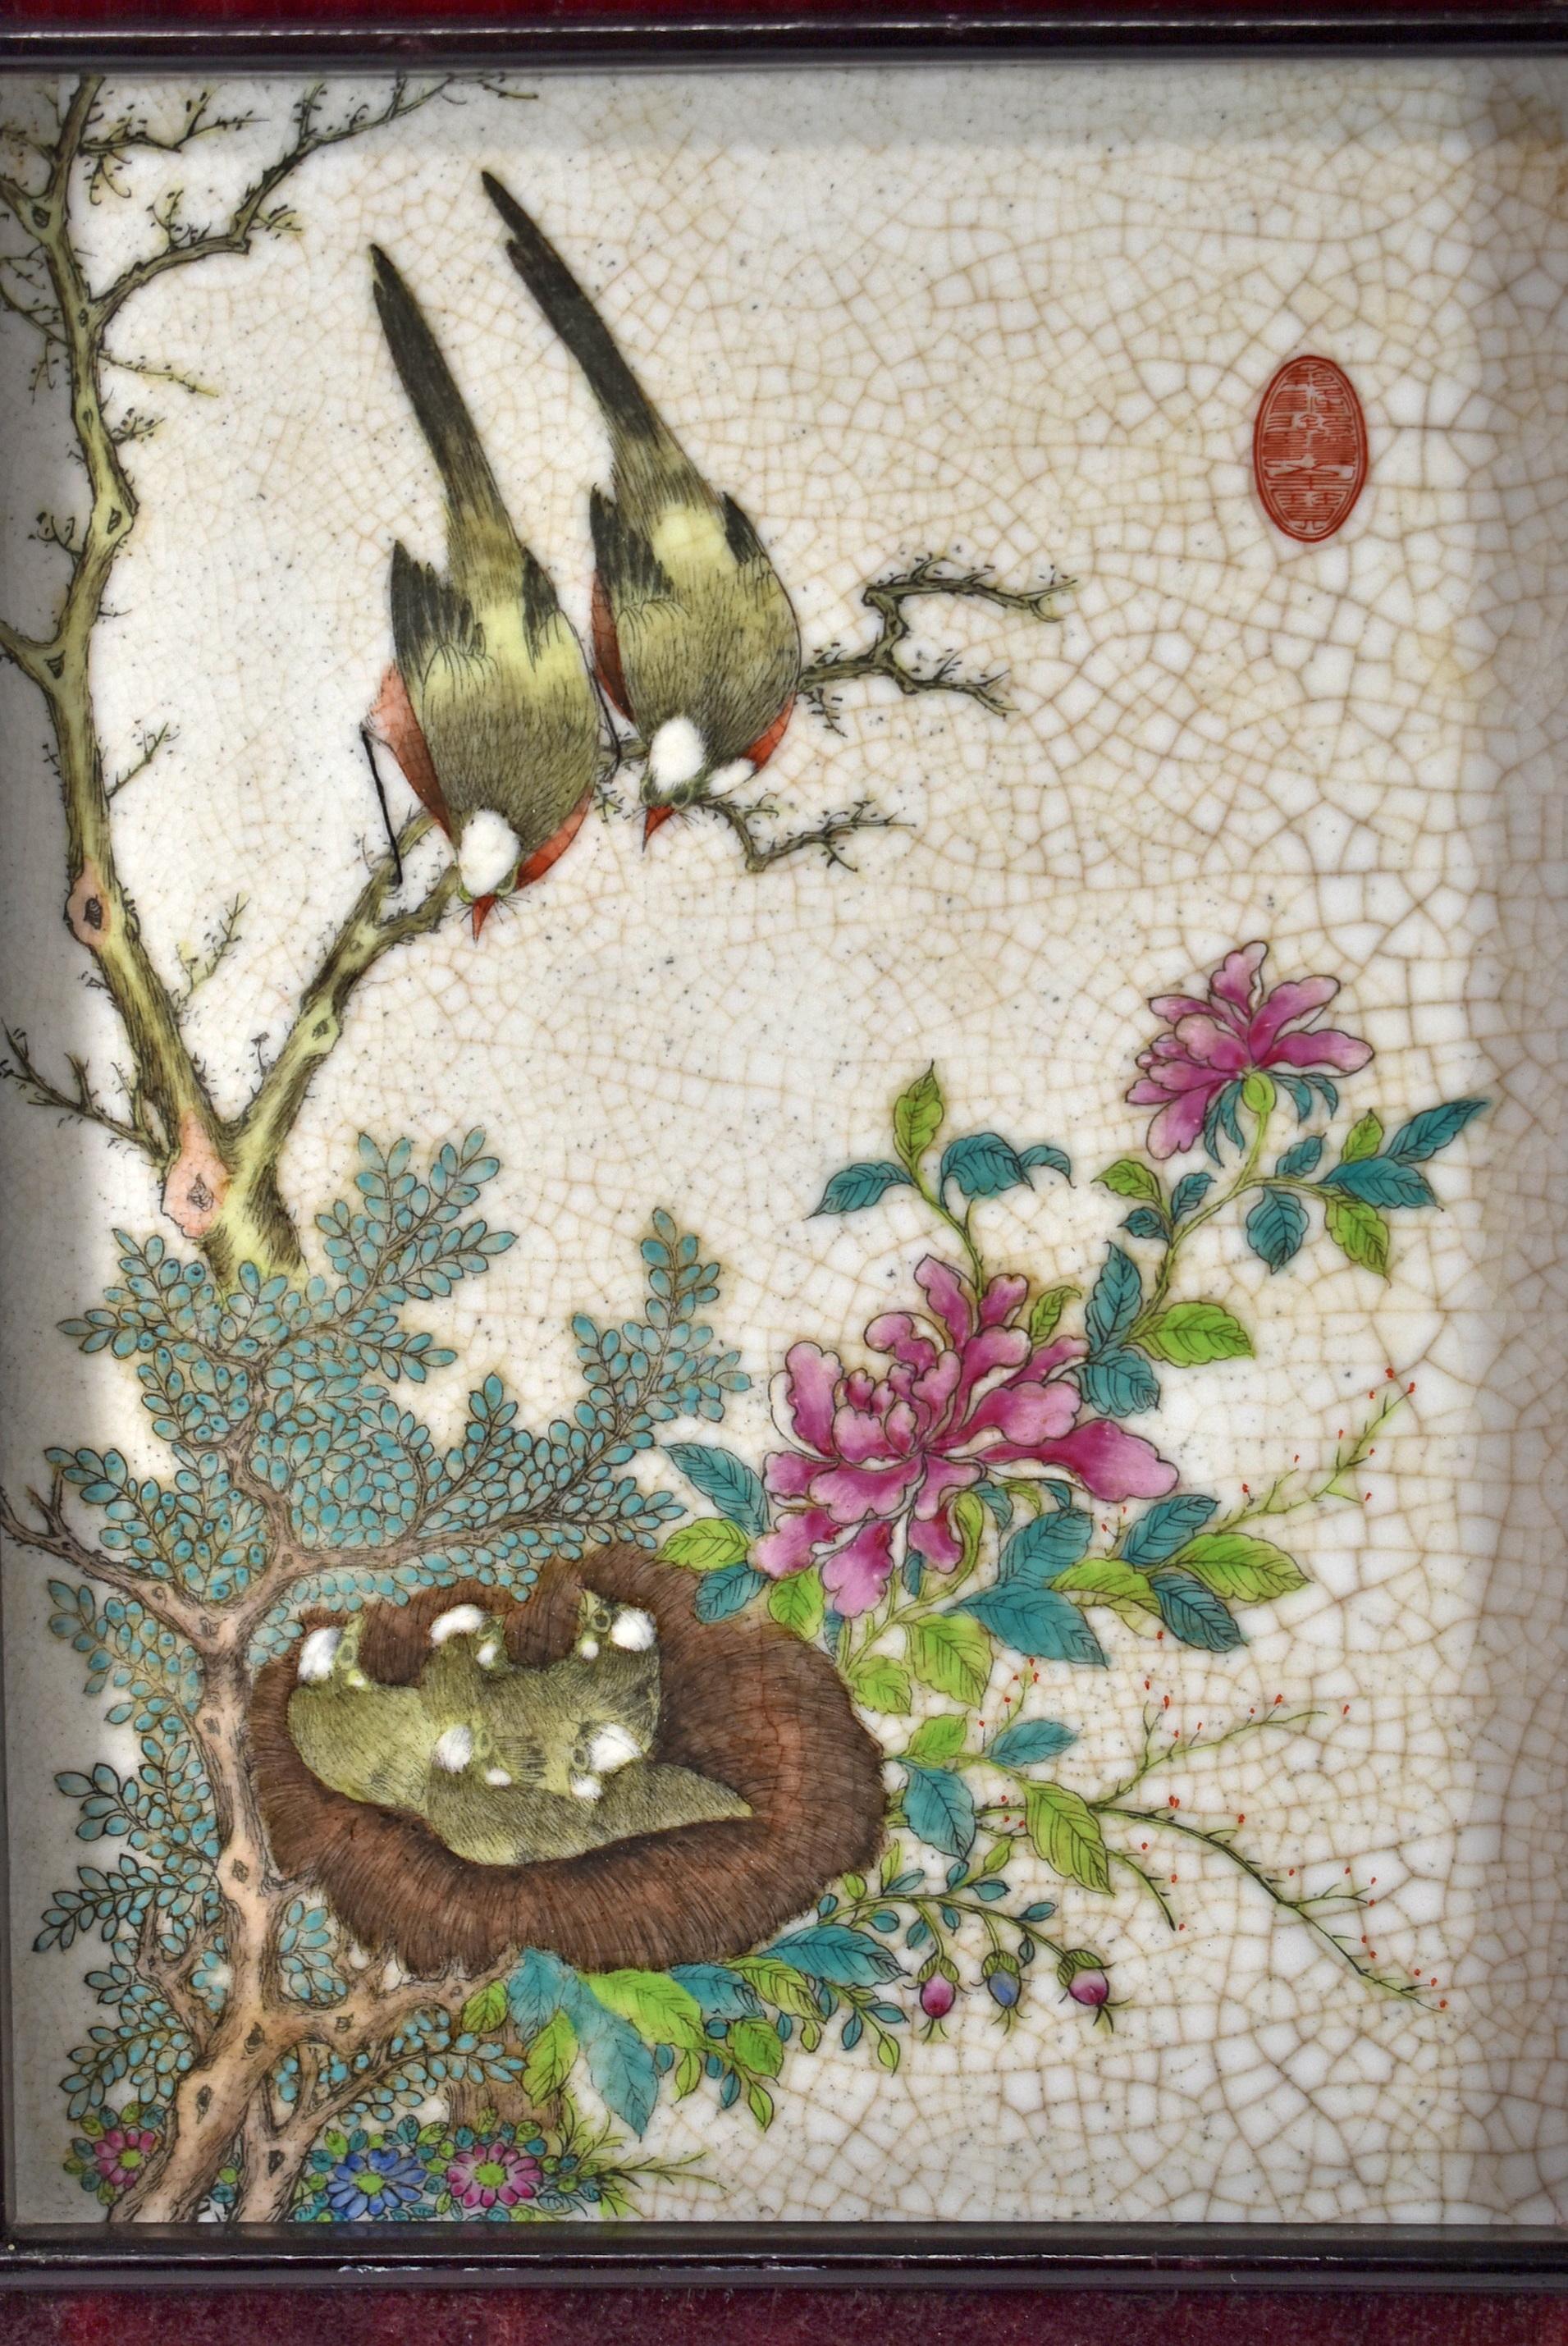 Vintage Chinese Porcelain Wall Art Plaque Framed and Signed. circa 20th century. Two birds looking down at a nest of fledglings in a tree. The tree has aqua flowers with aqua and bright green leaves. The tree also has pink flowers and pink and blue